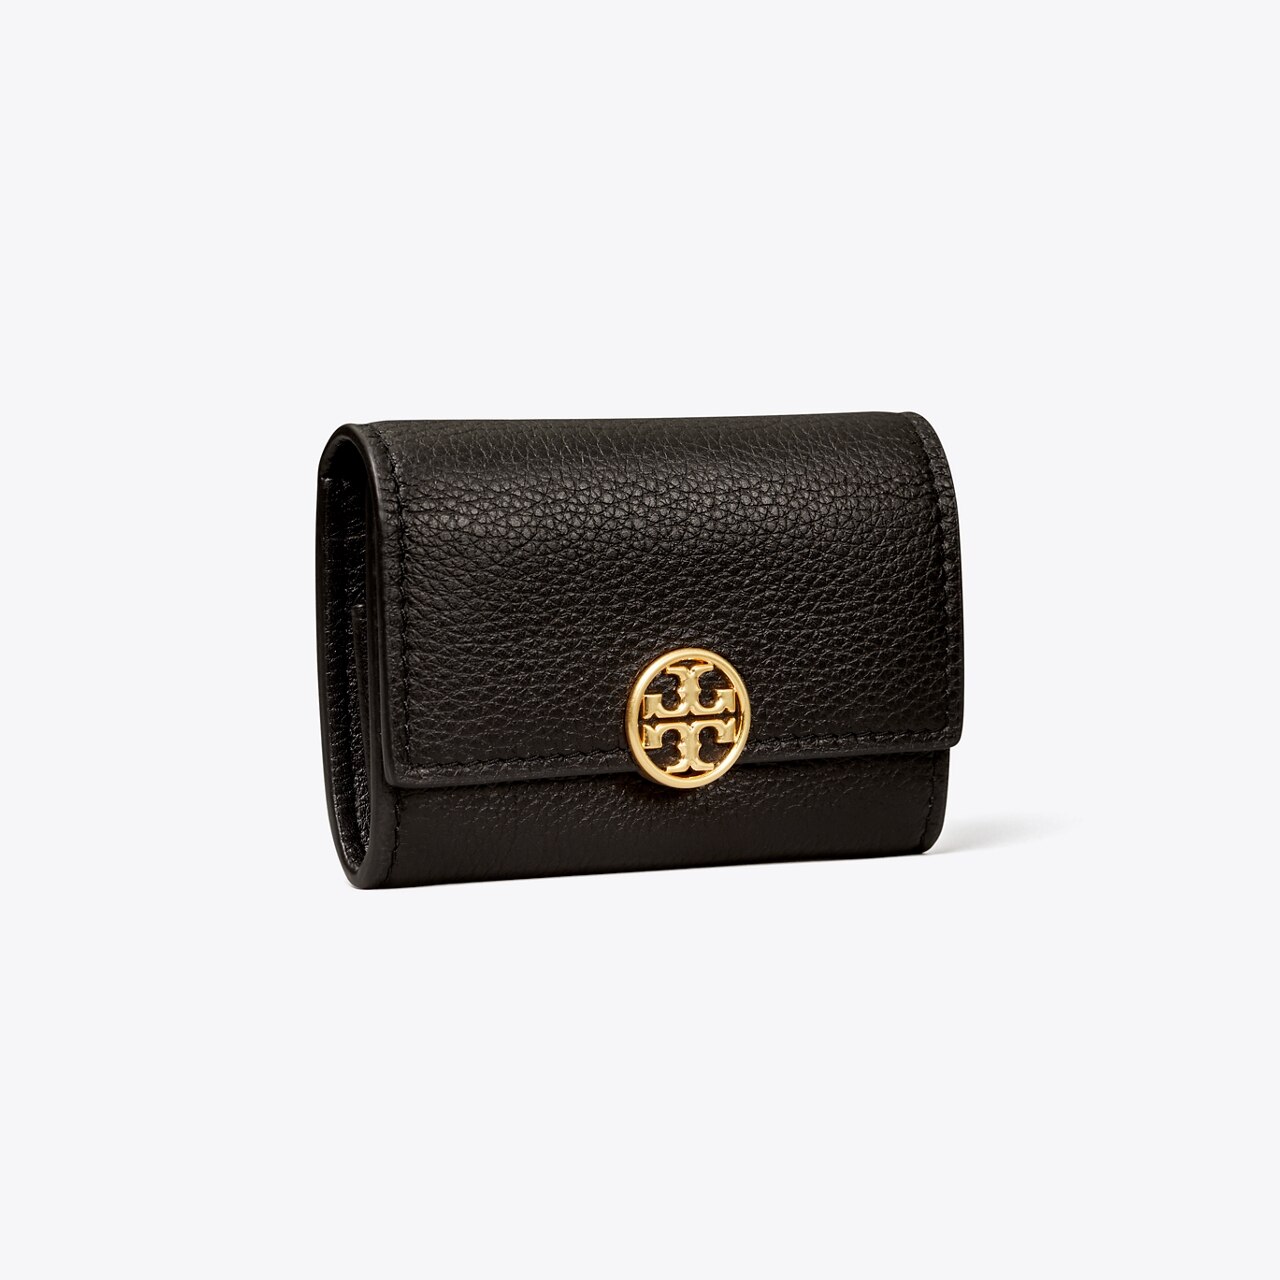 Wallet Designer By Tory Burch Size: Large